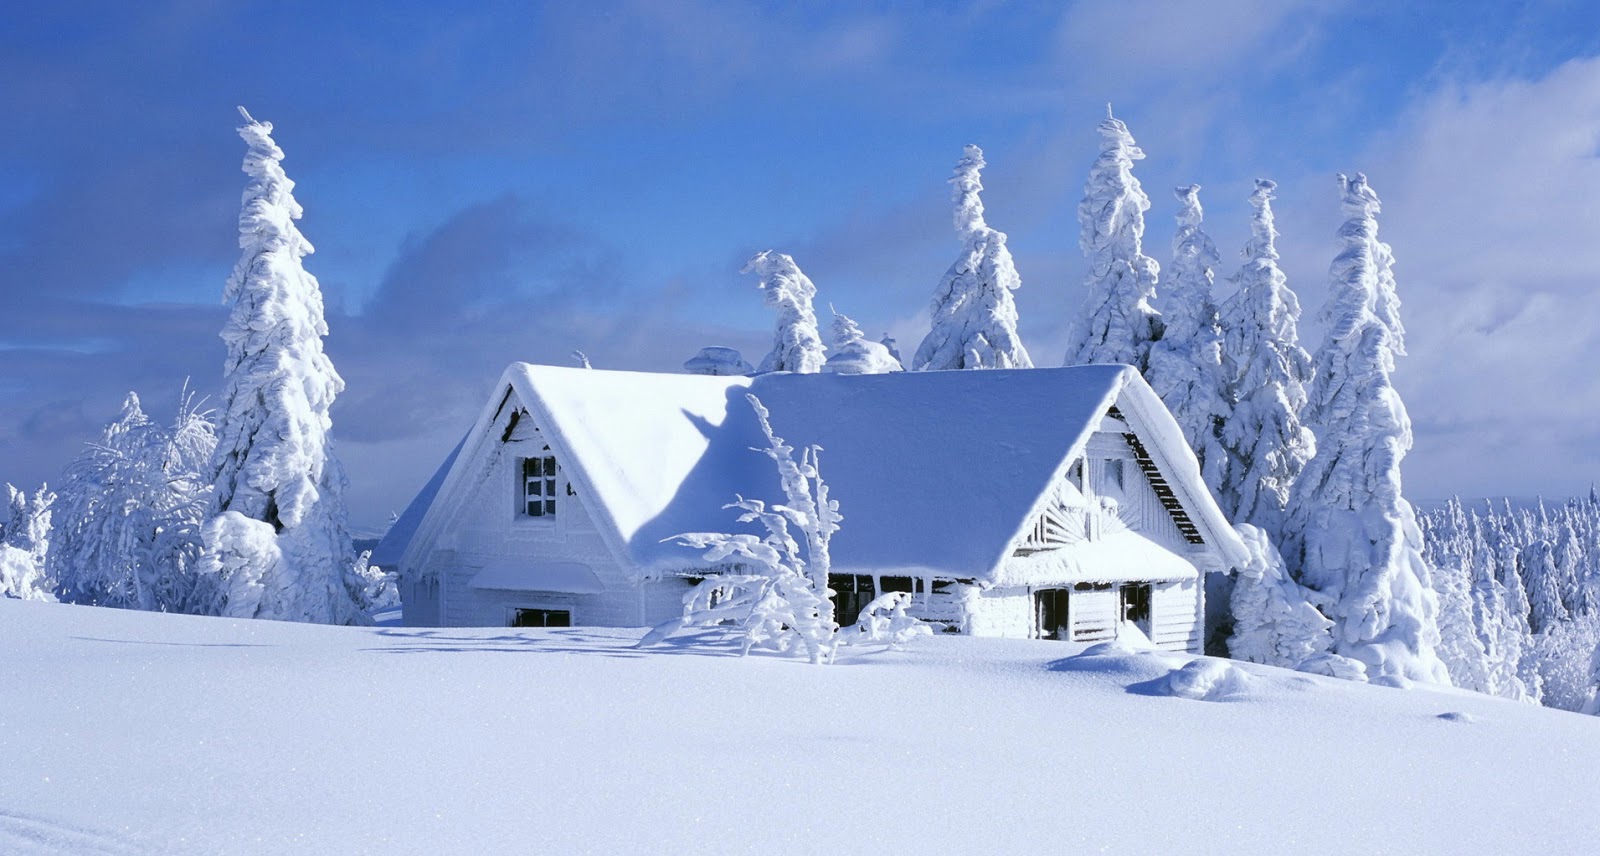 Climate Tech Simple Steps to Cold Weather Safety